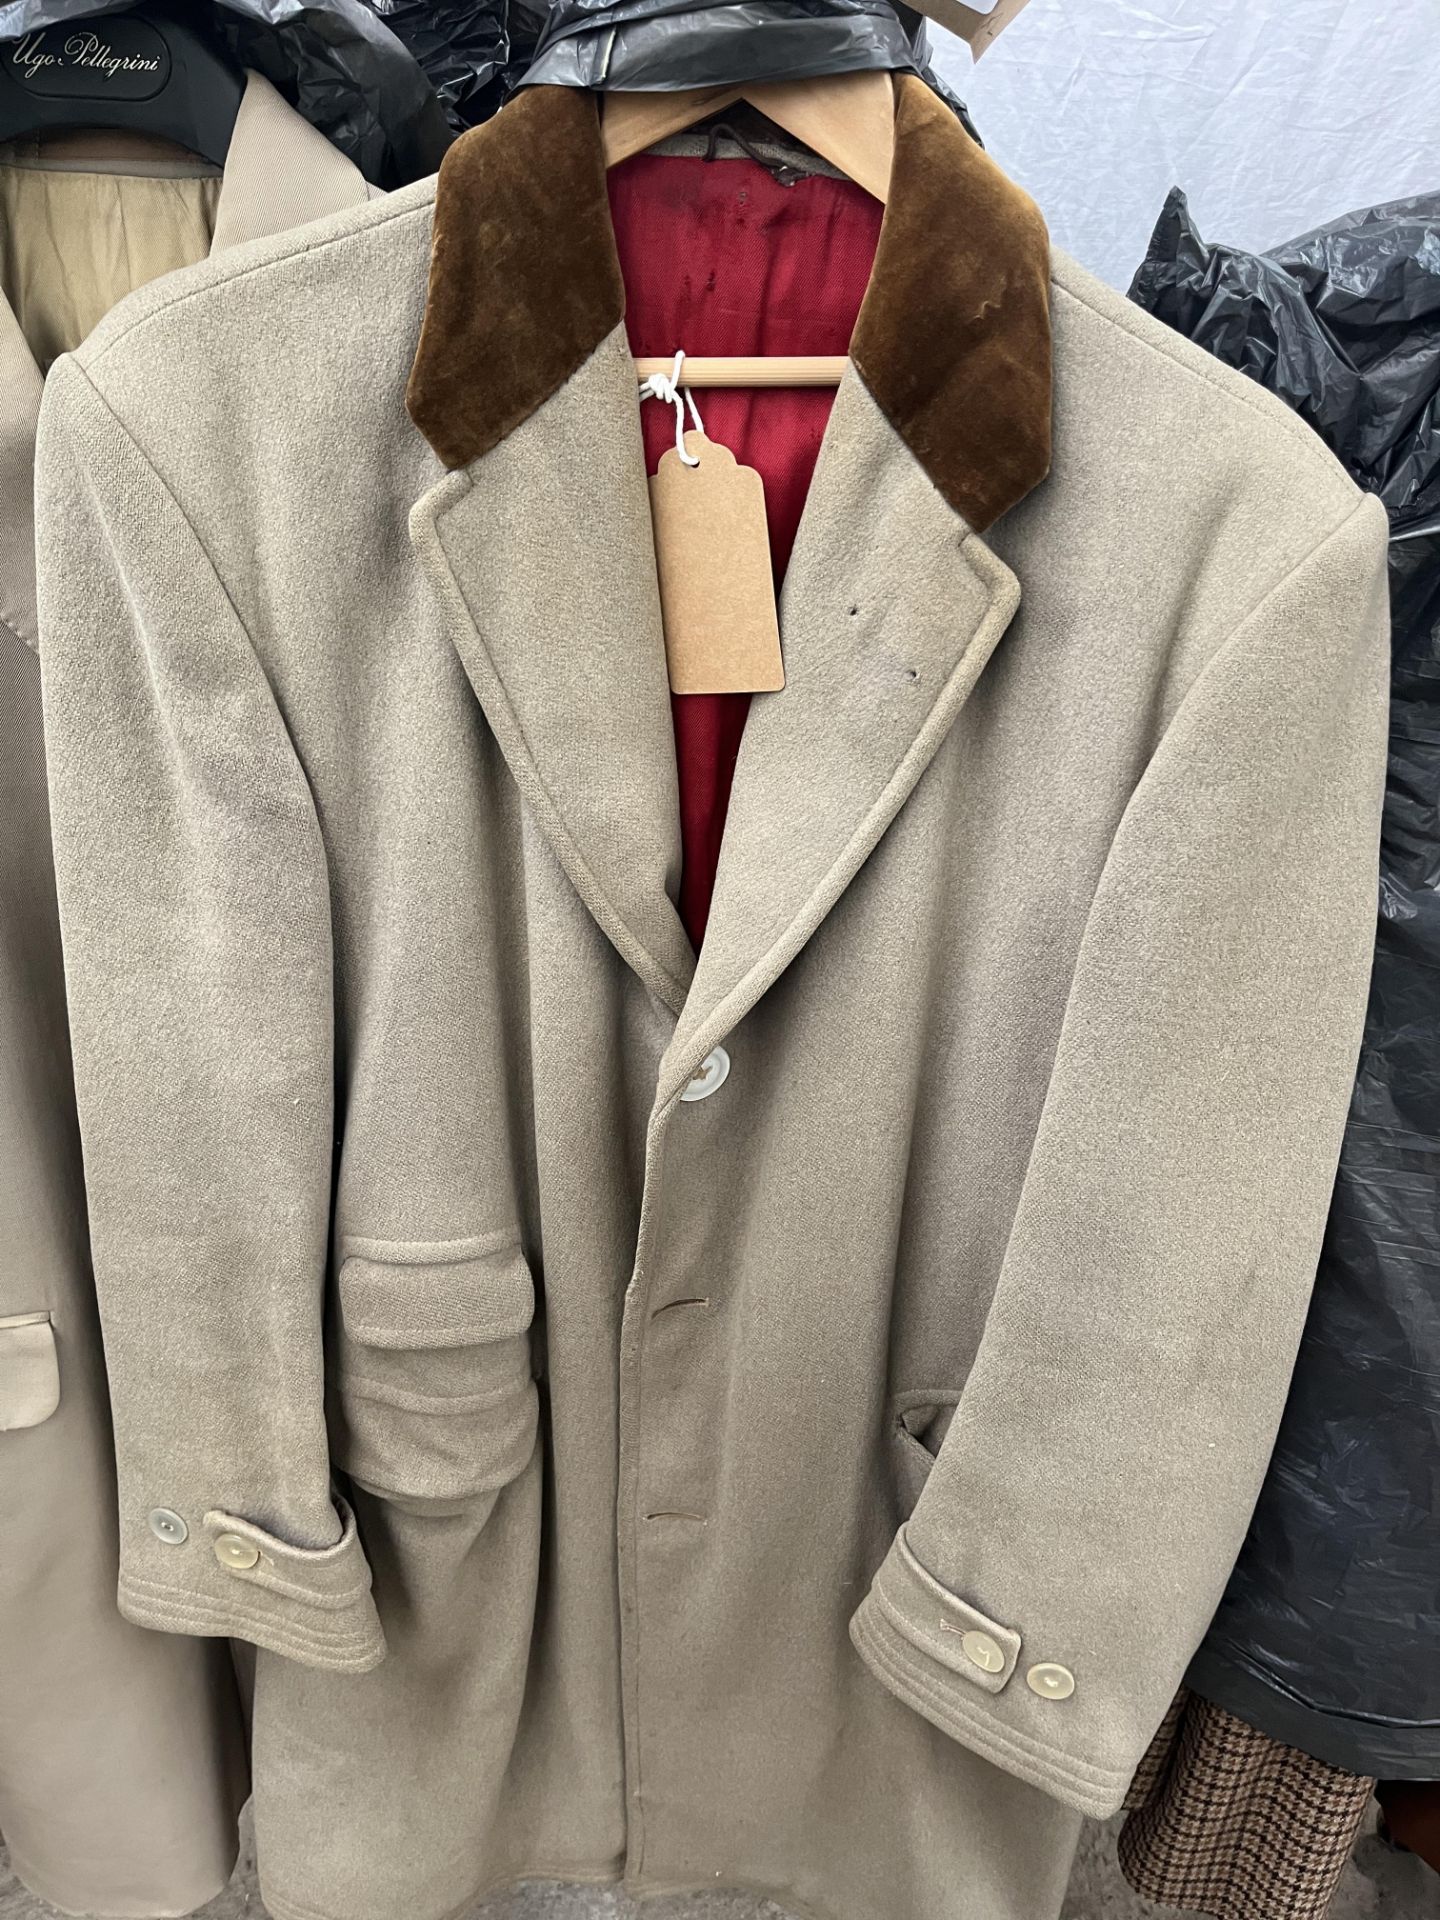 Full length beige coachman's coat with brown collar, together with a long beige coat by Aquascutum - Image 3 of 3